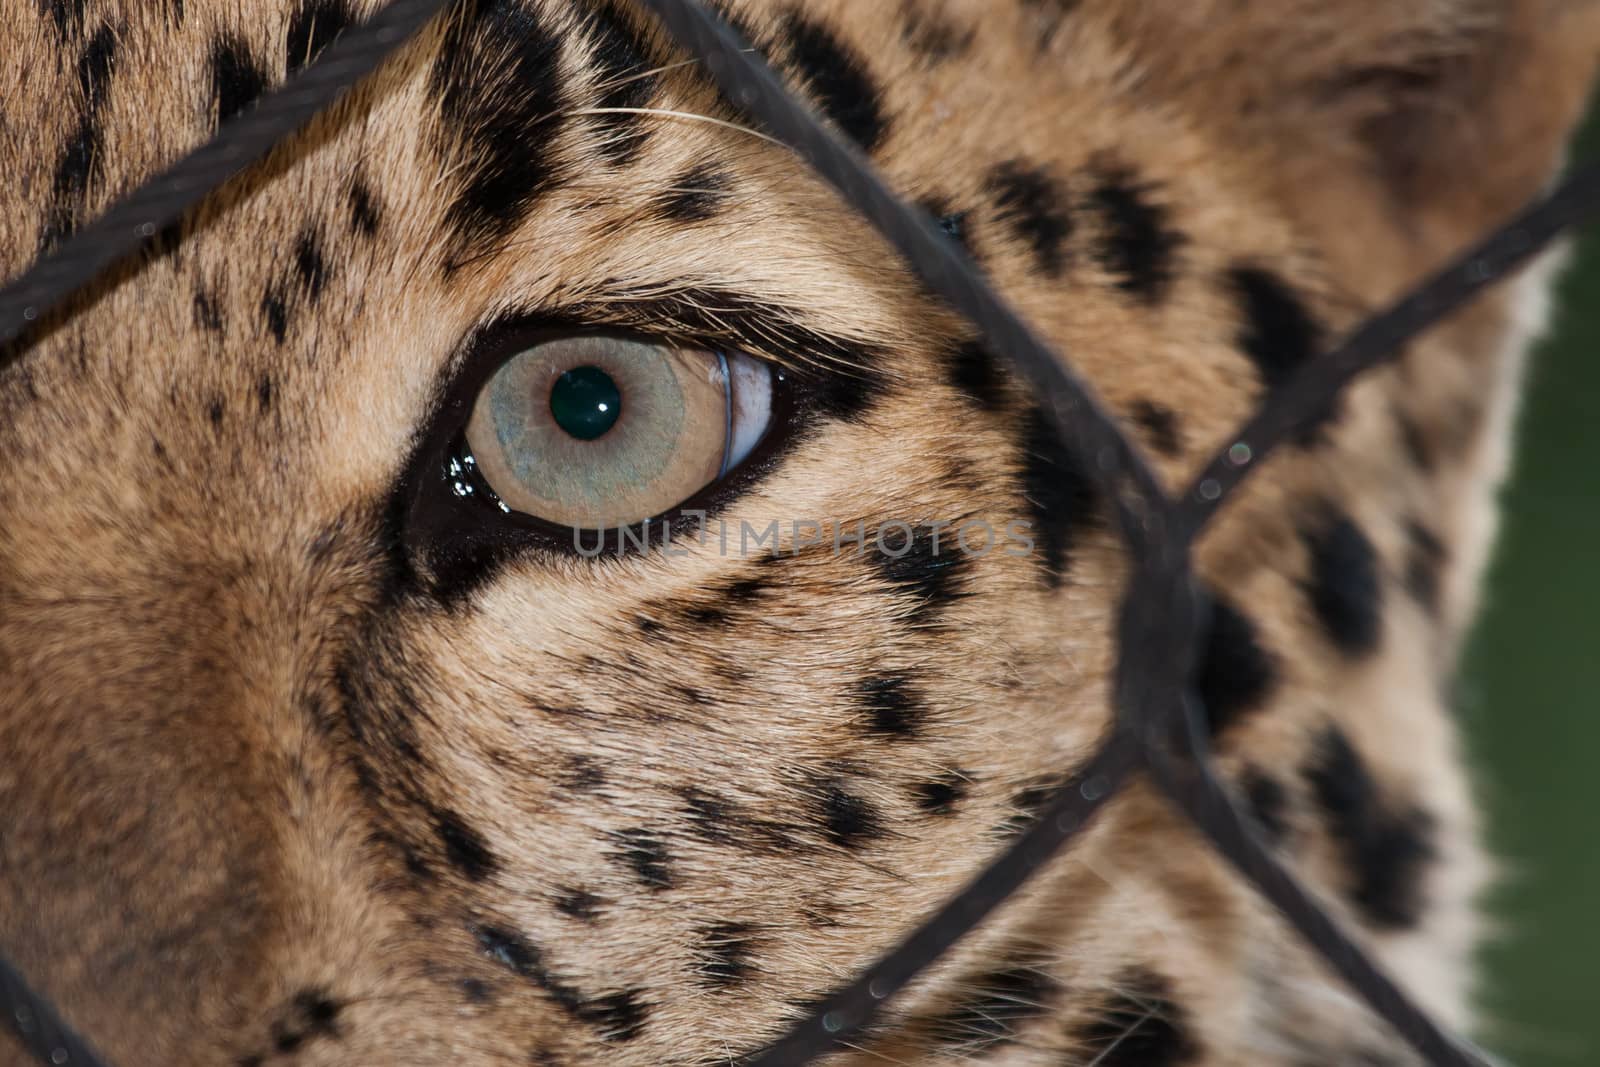 Amur Leopard looking through a fence by Coffee999